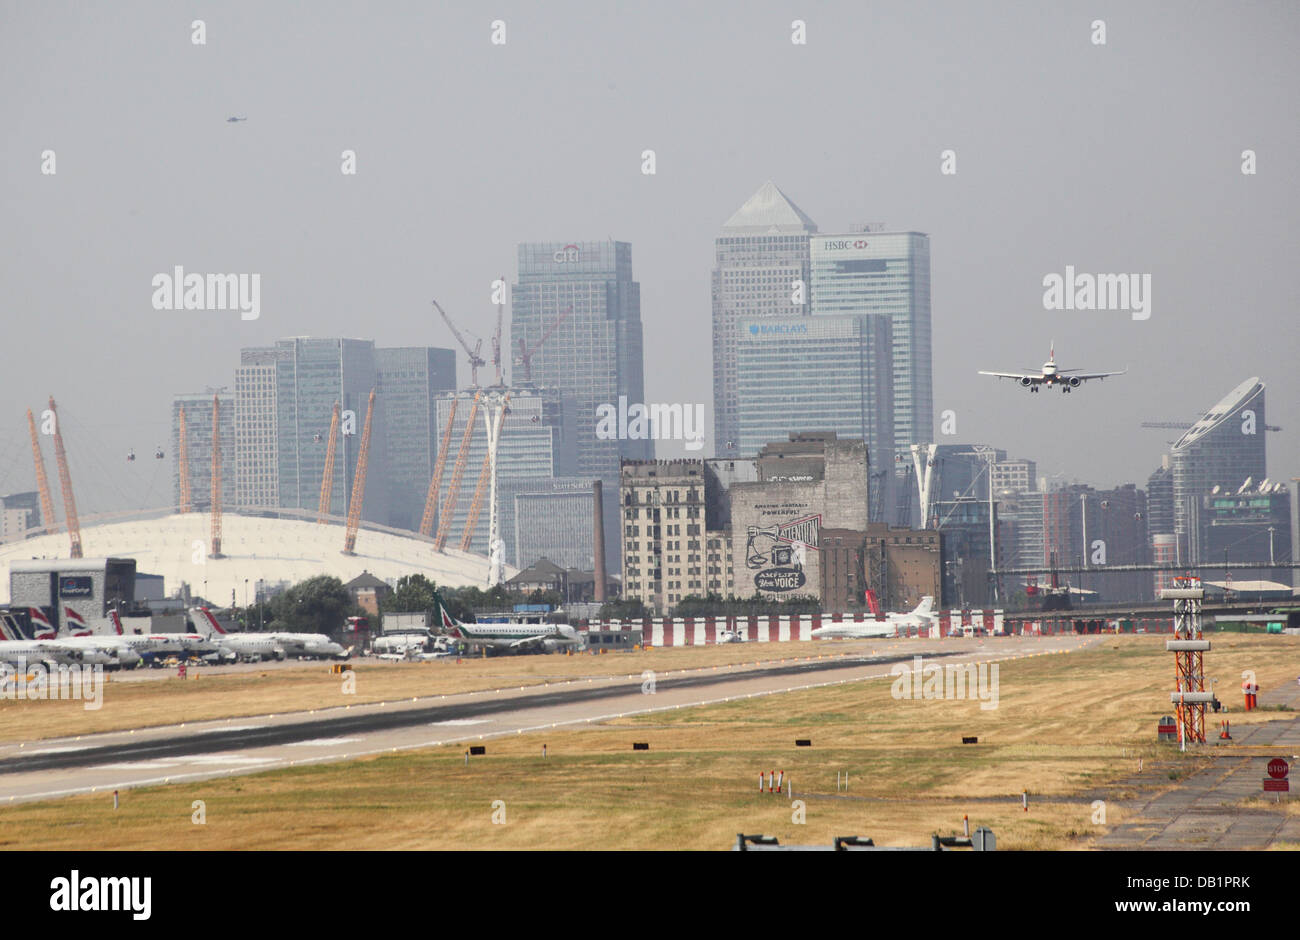 A passenger jet lands at London City Airport. Canary Wharf and the Millennium Dome in background Stock Photo